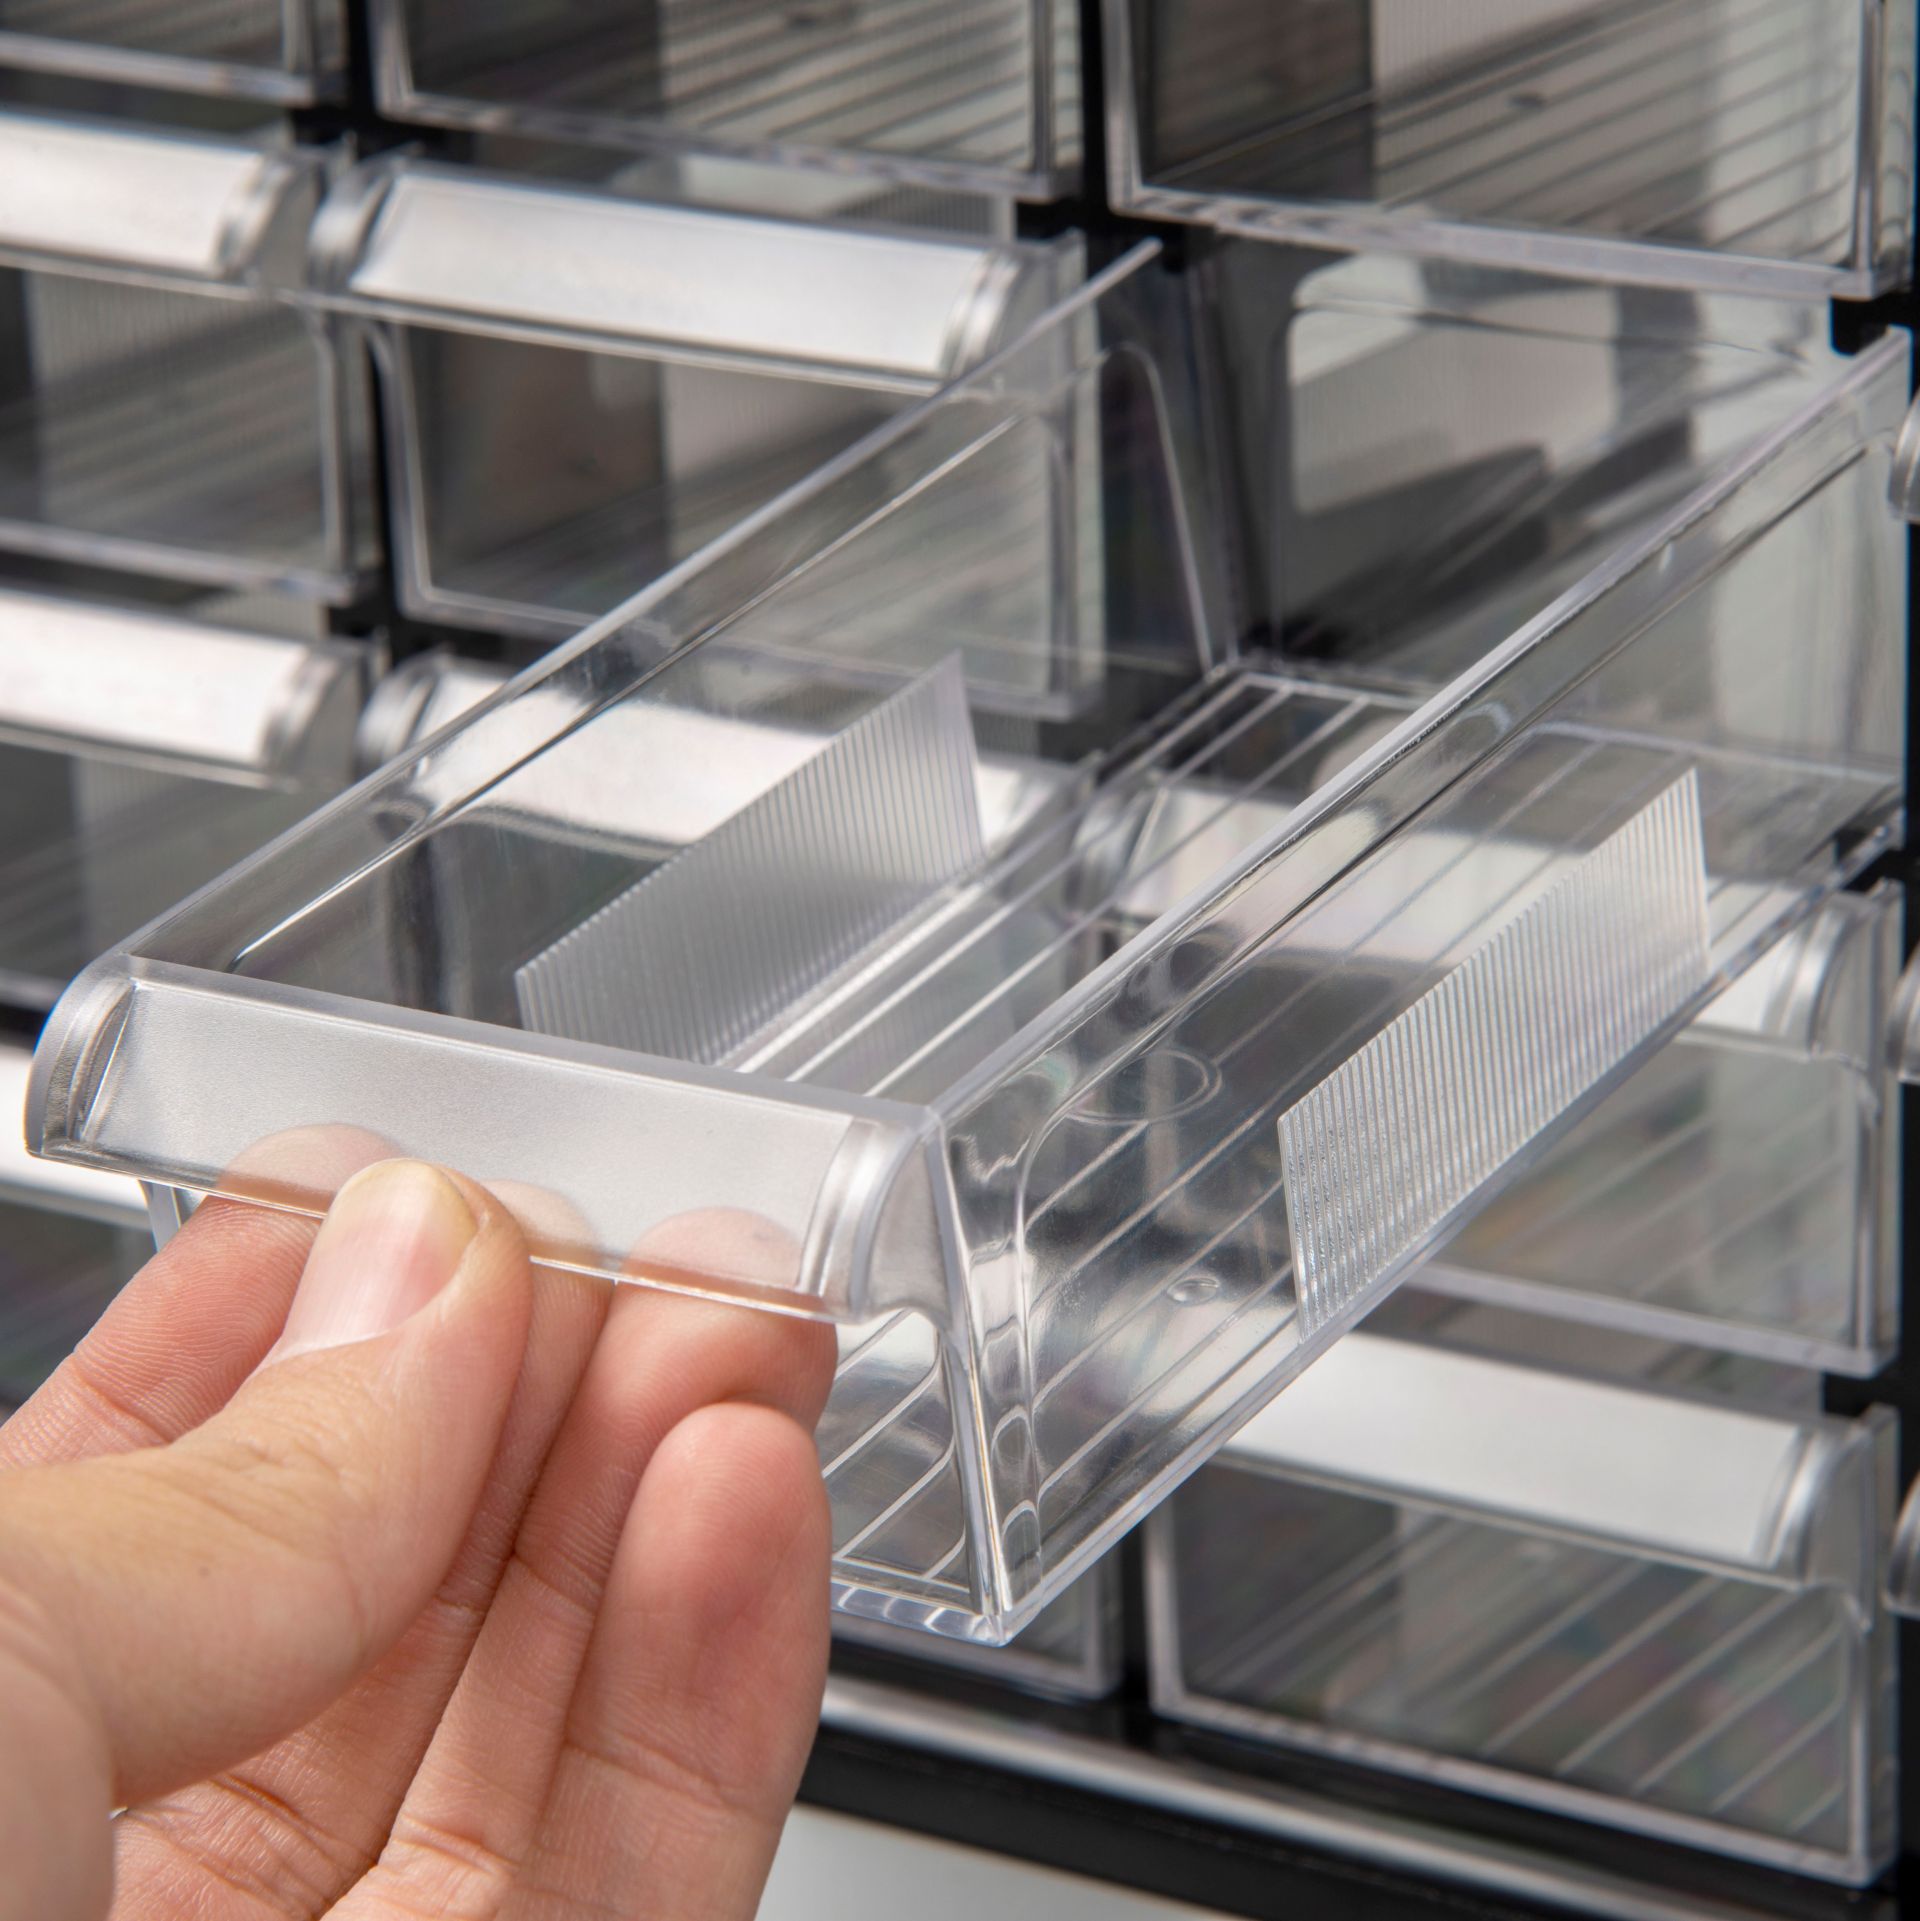 Wholesale Acrylic Stackable Storage Drawer and Fixtures for Retail Stores 